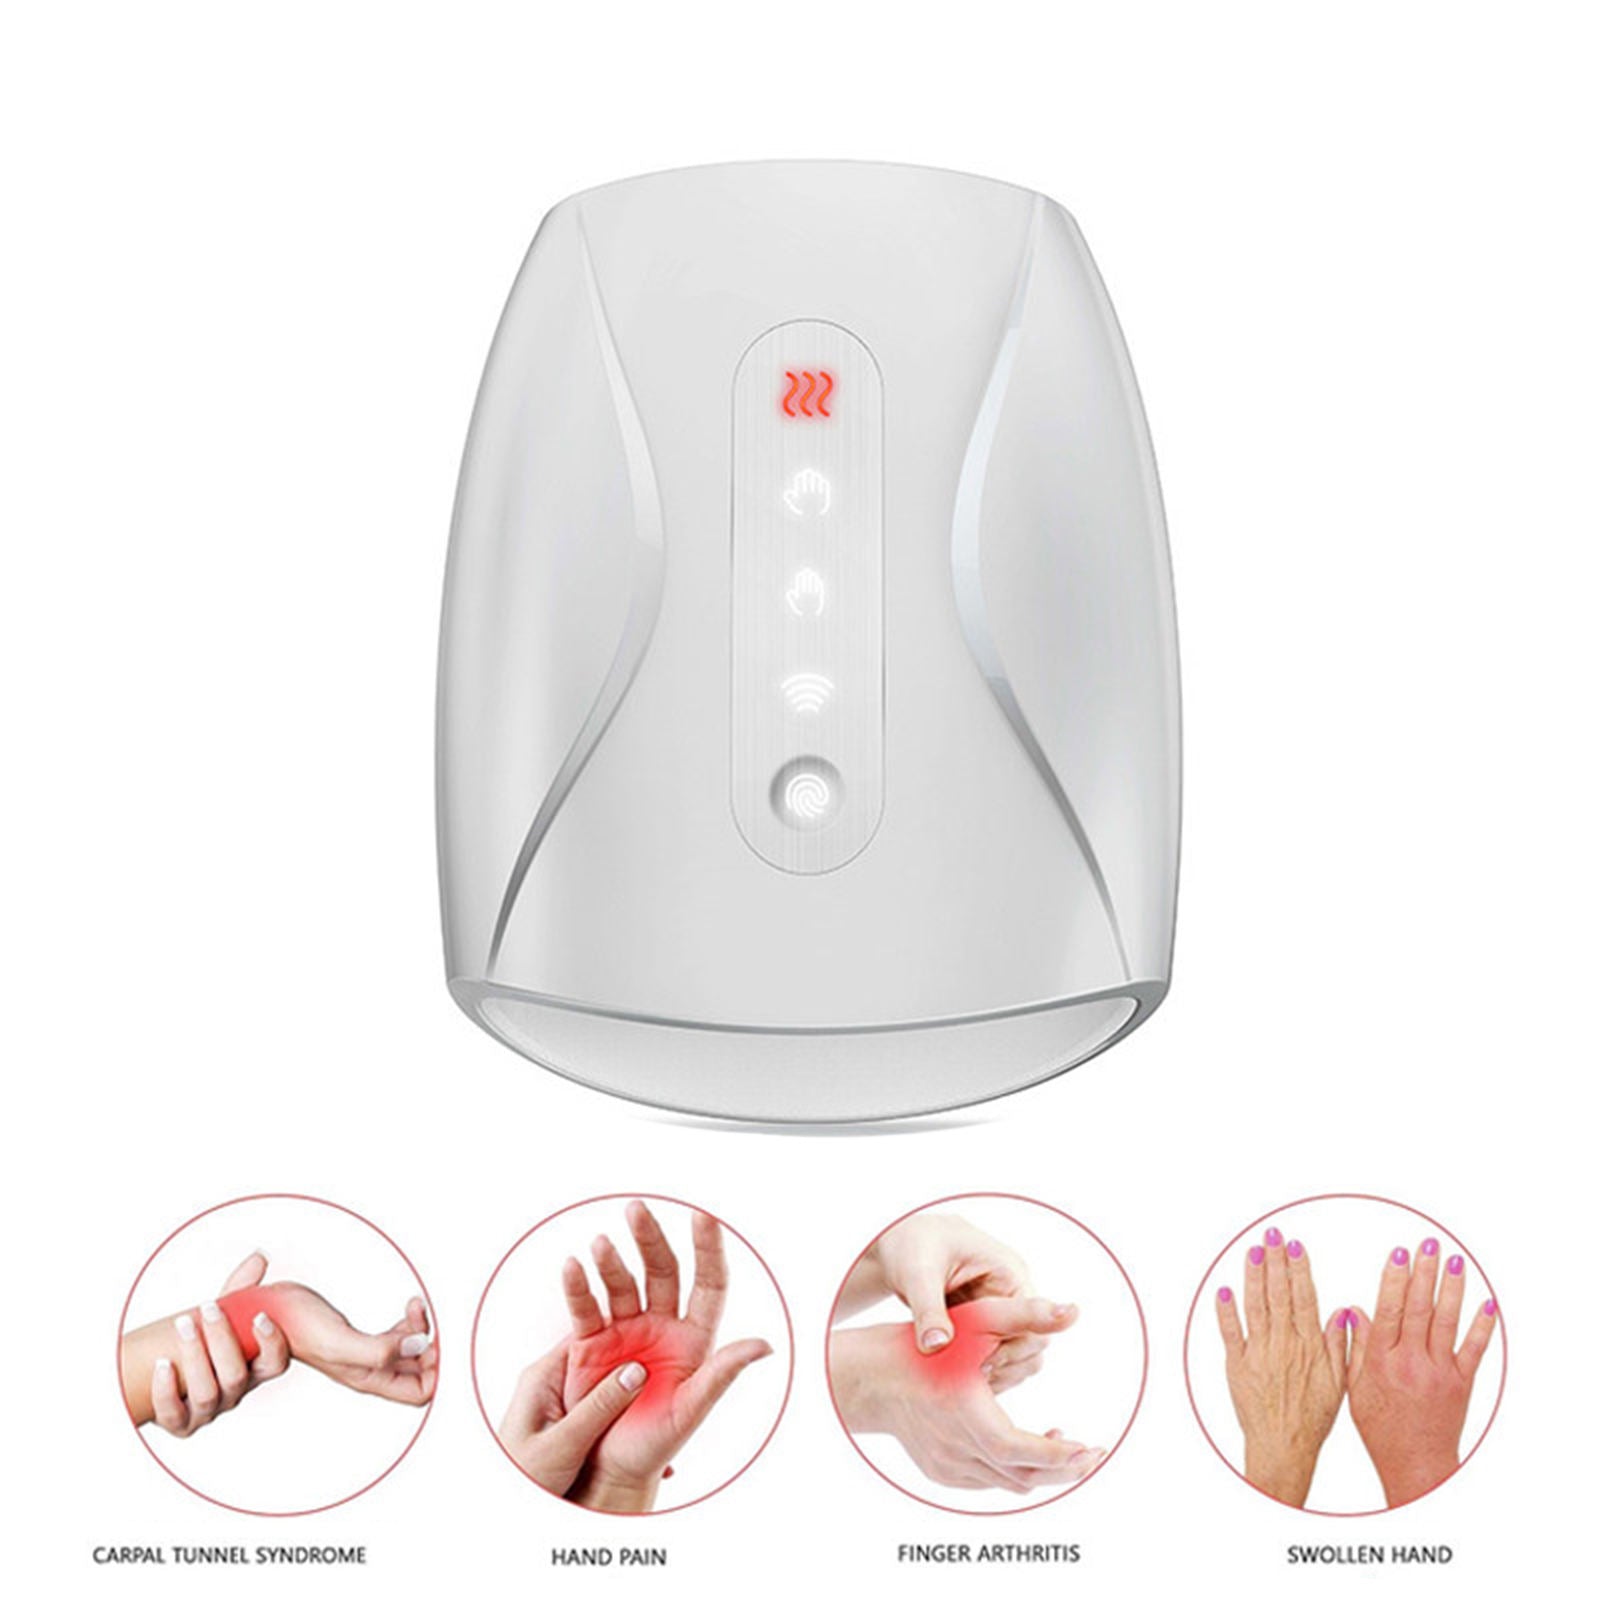 Handheld massager with heat compression 6 modes 3 levels for relief from